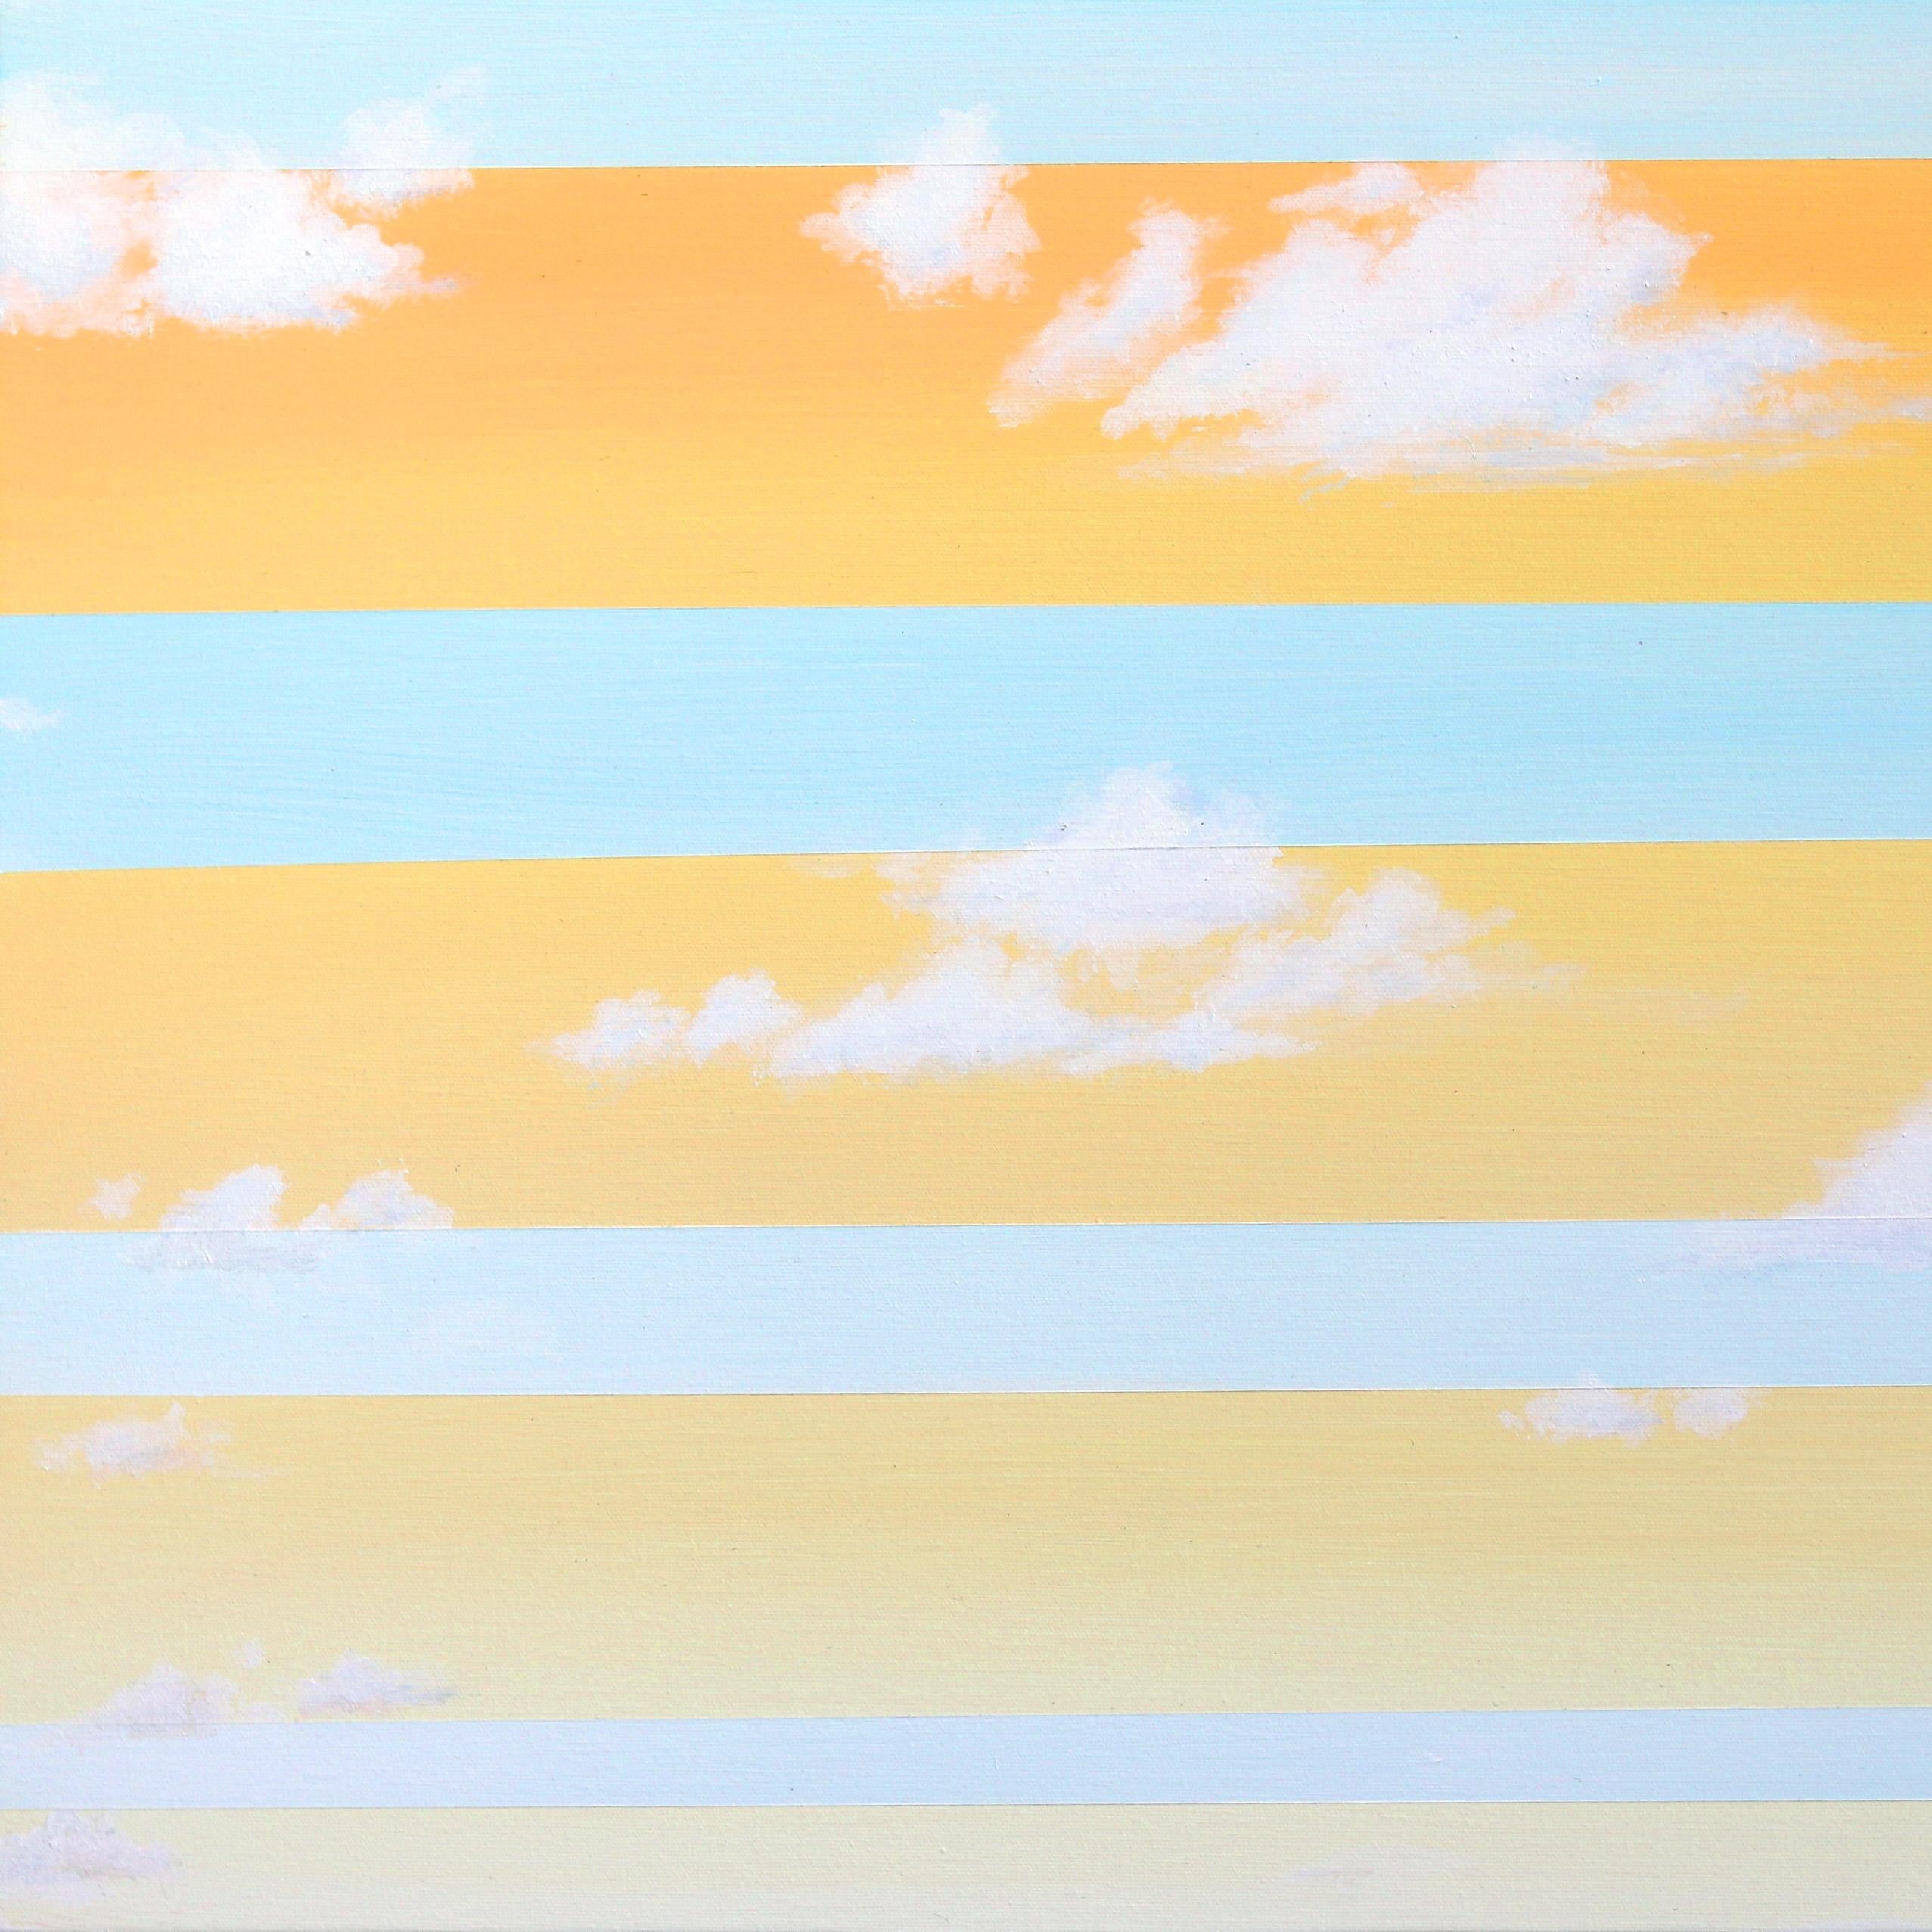 Summer Vibes 1 - Yellow and Blue Abstract Geometric Sky Painting on Canvas For Sale 4